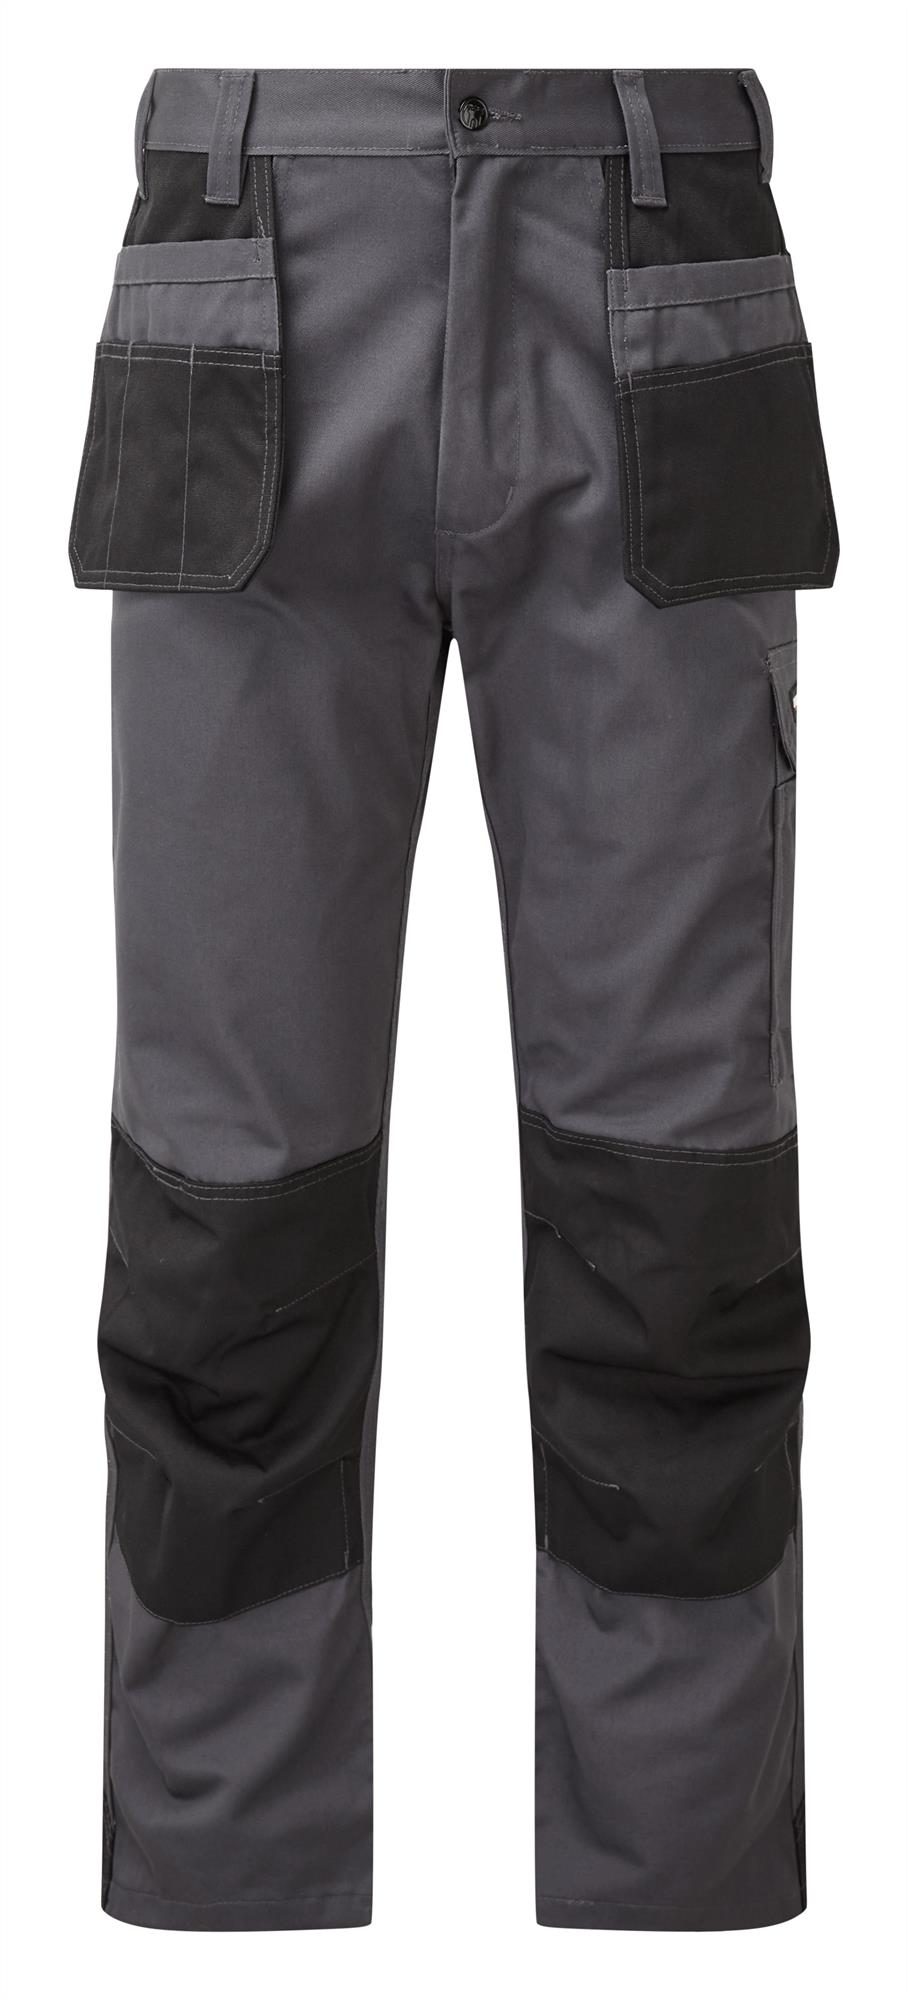 TuffStuff Excel grey/black contrast heavyweight poly-cotton holster pocket work cargo trouser #710